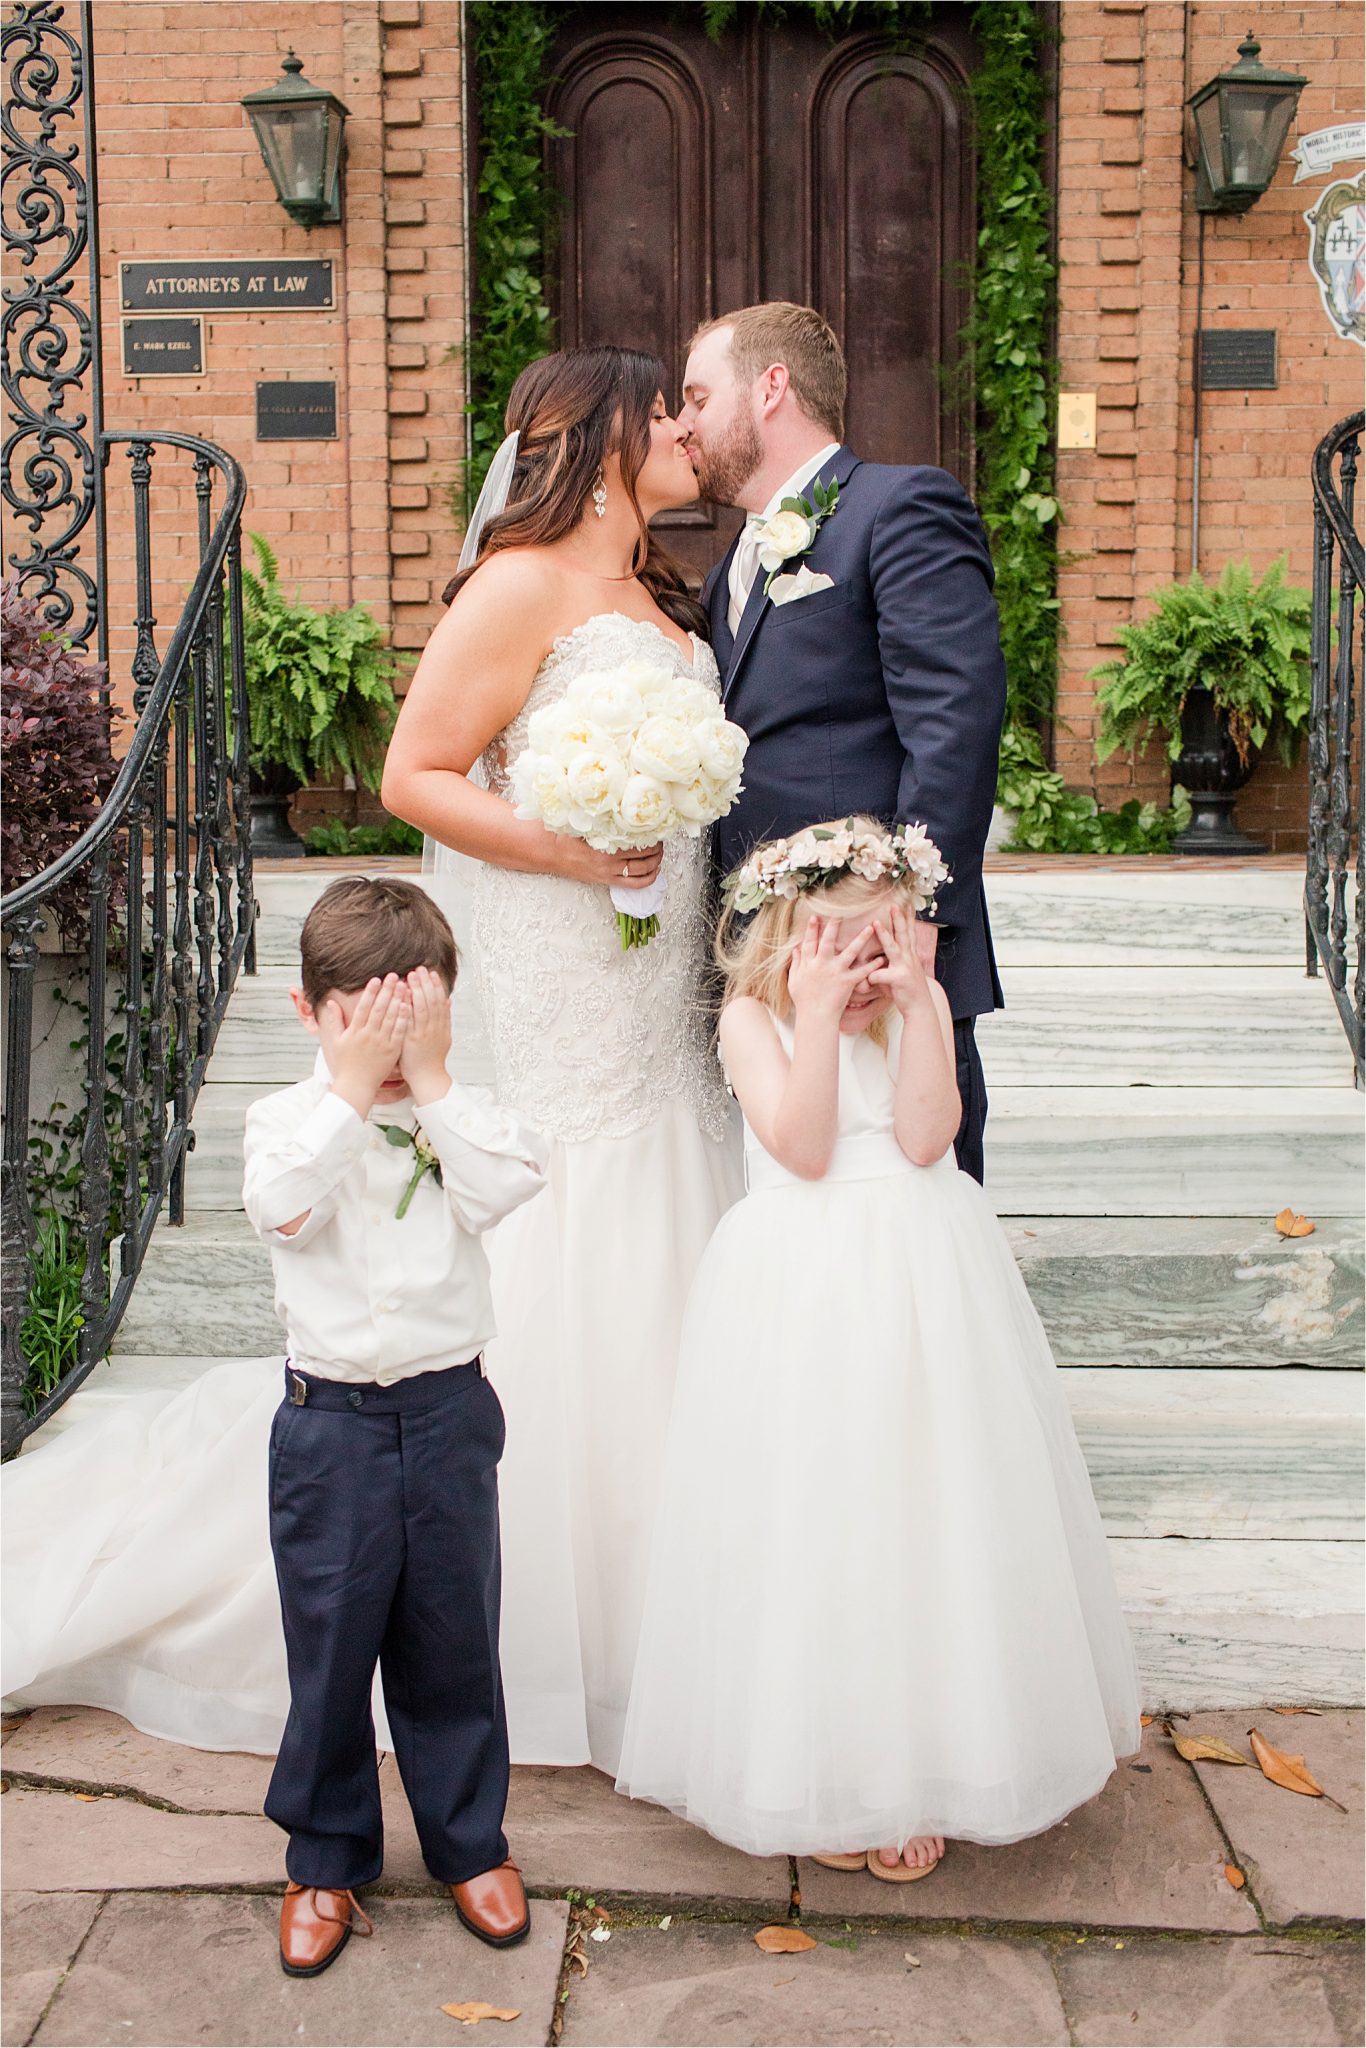 cute ring bearer and flower girl pics-with the bride and groom-flower crown flower girl-eyes covered-kissing